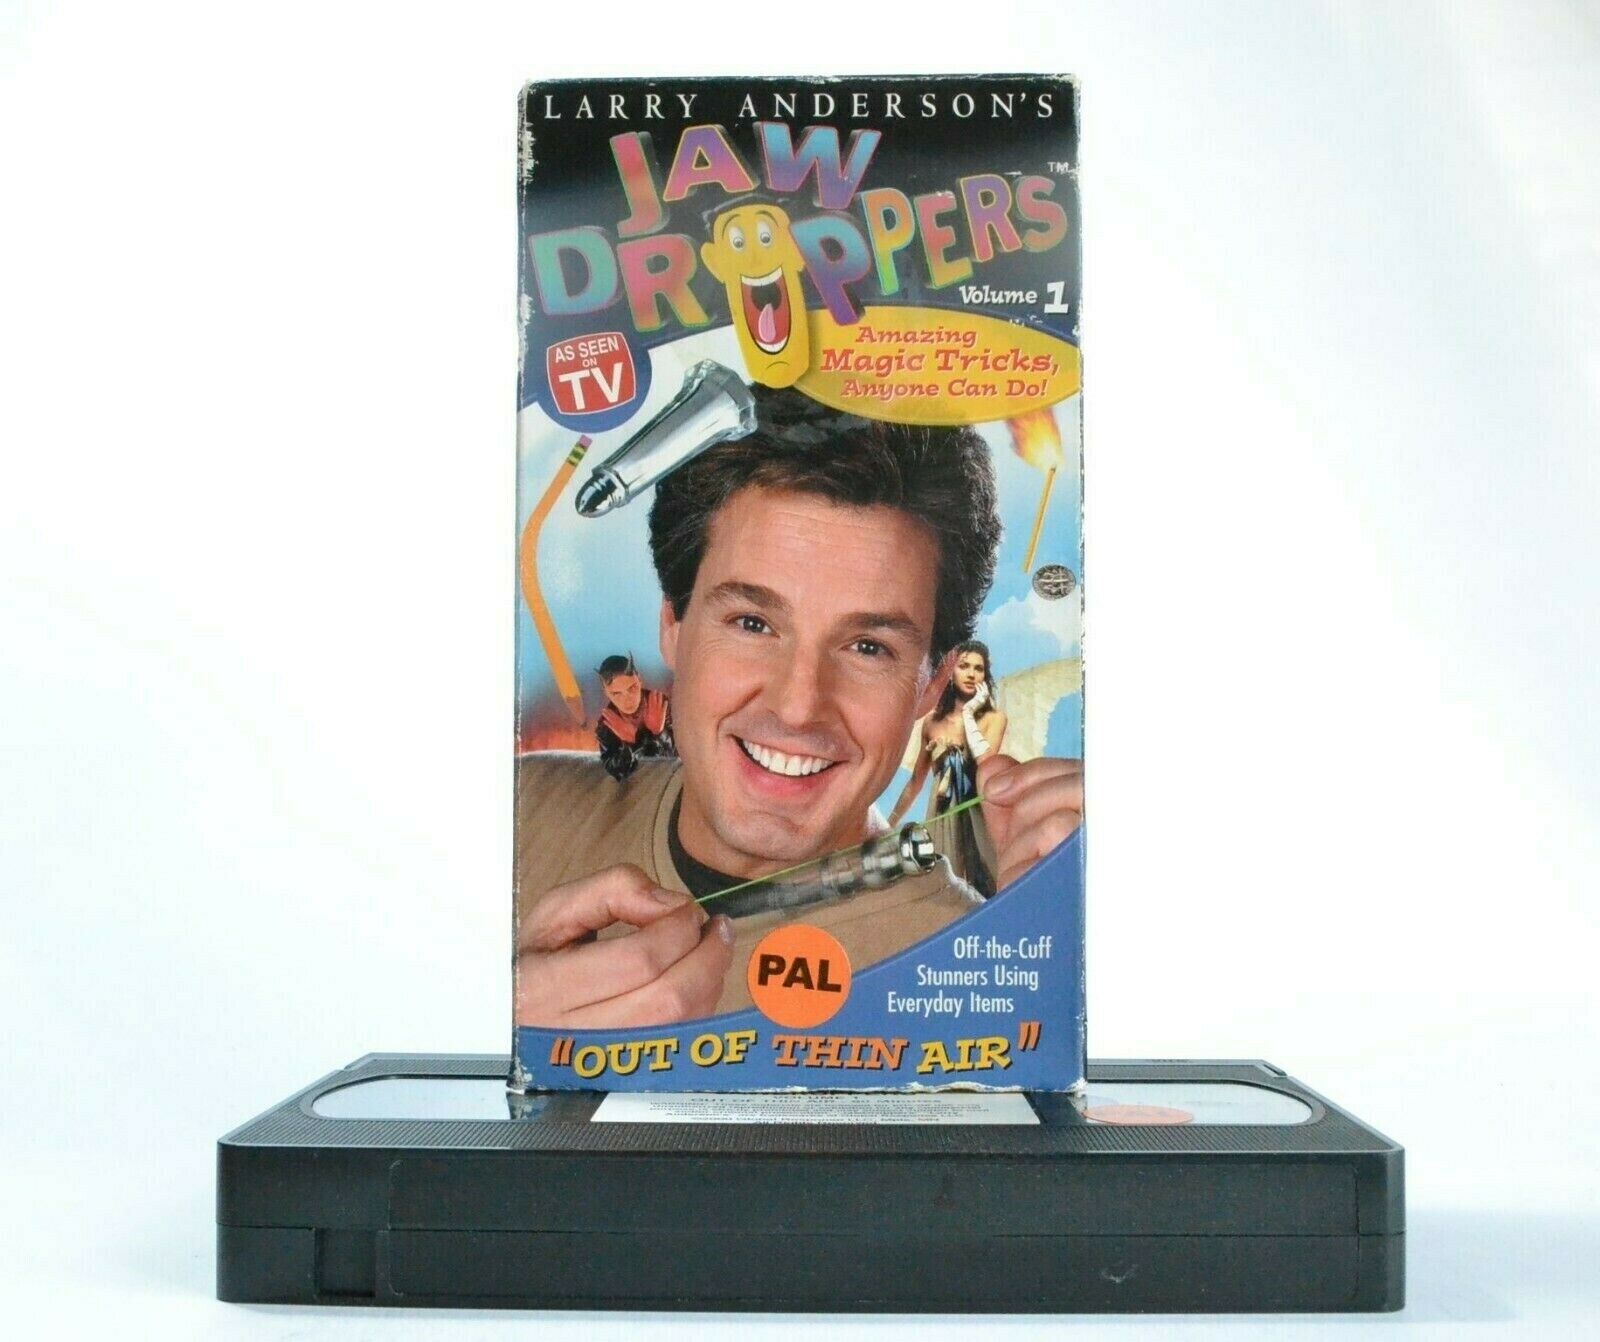 Jaw Droppers, Vol.1: By Larry Anderson - Carton Box - Magic Tricks - Pal VHS-